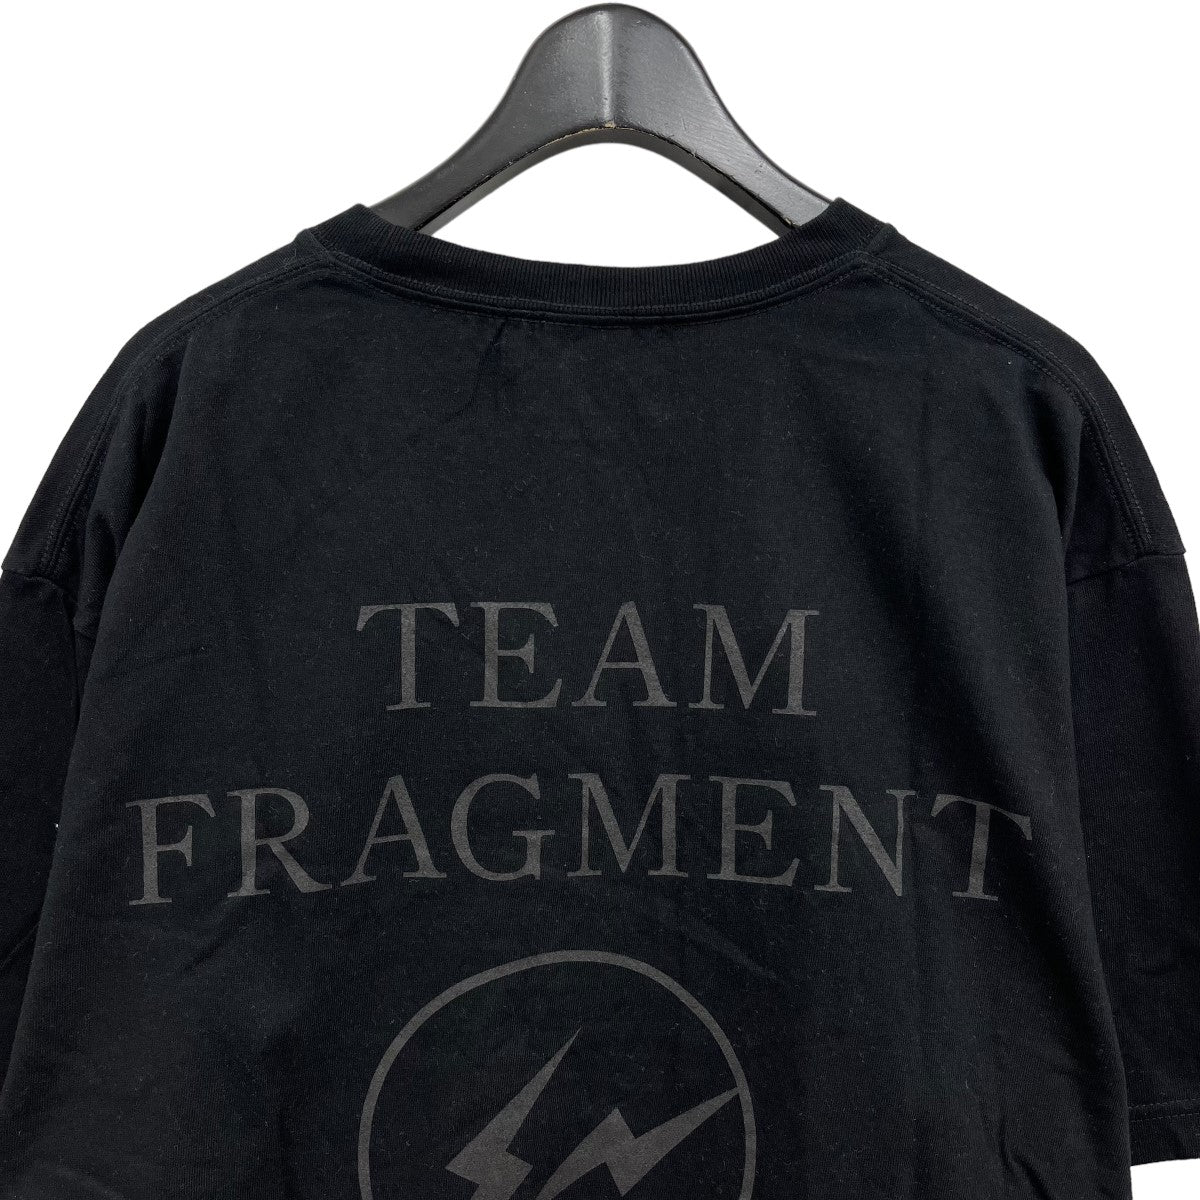 FRAGMENT(フラグメント) FORUM STORE MEMBER 限定 TEAM FRAGMENT S S TeeプリントTシャツ